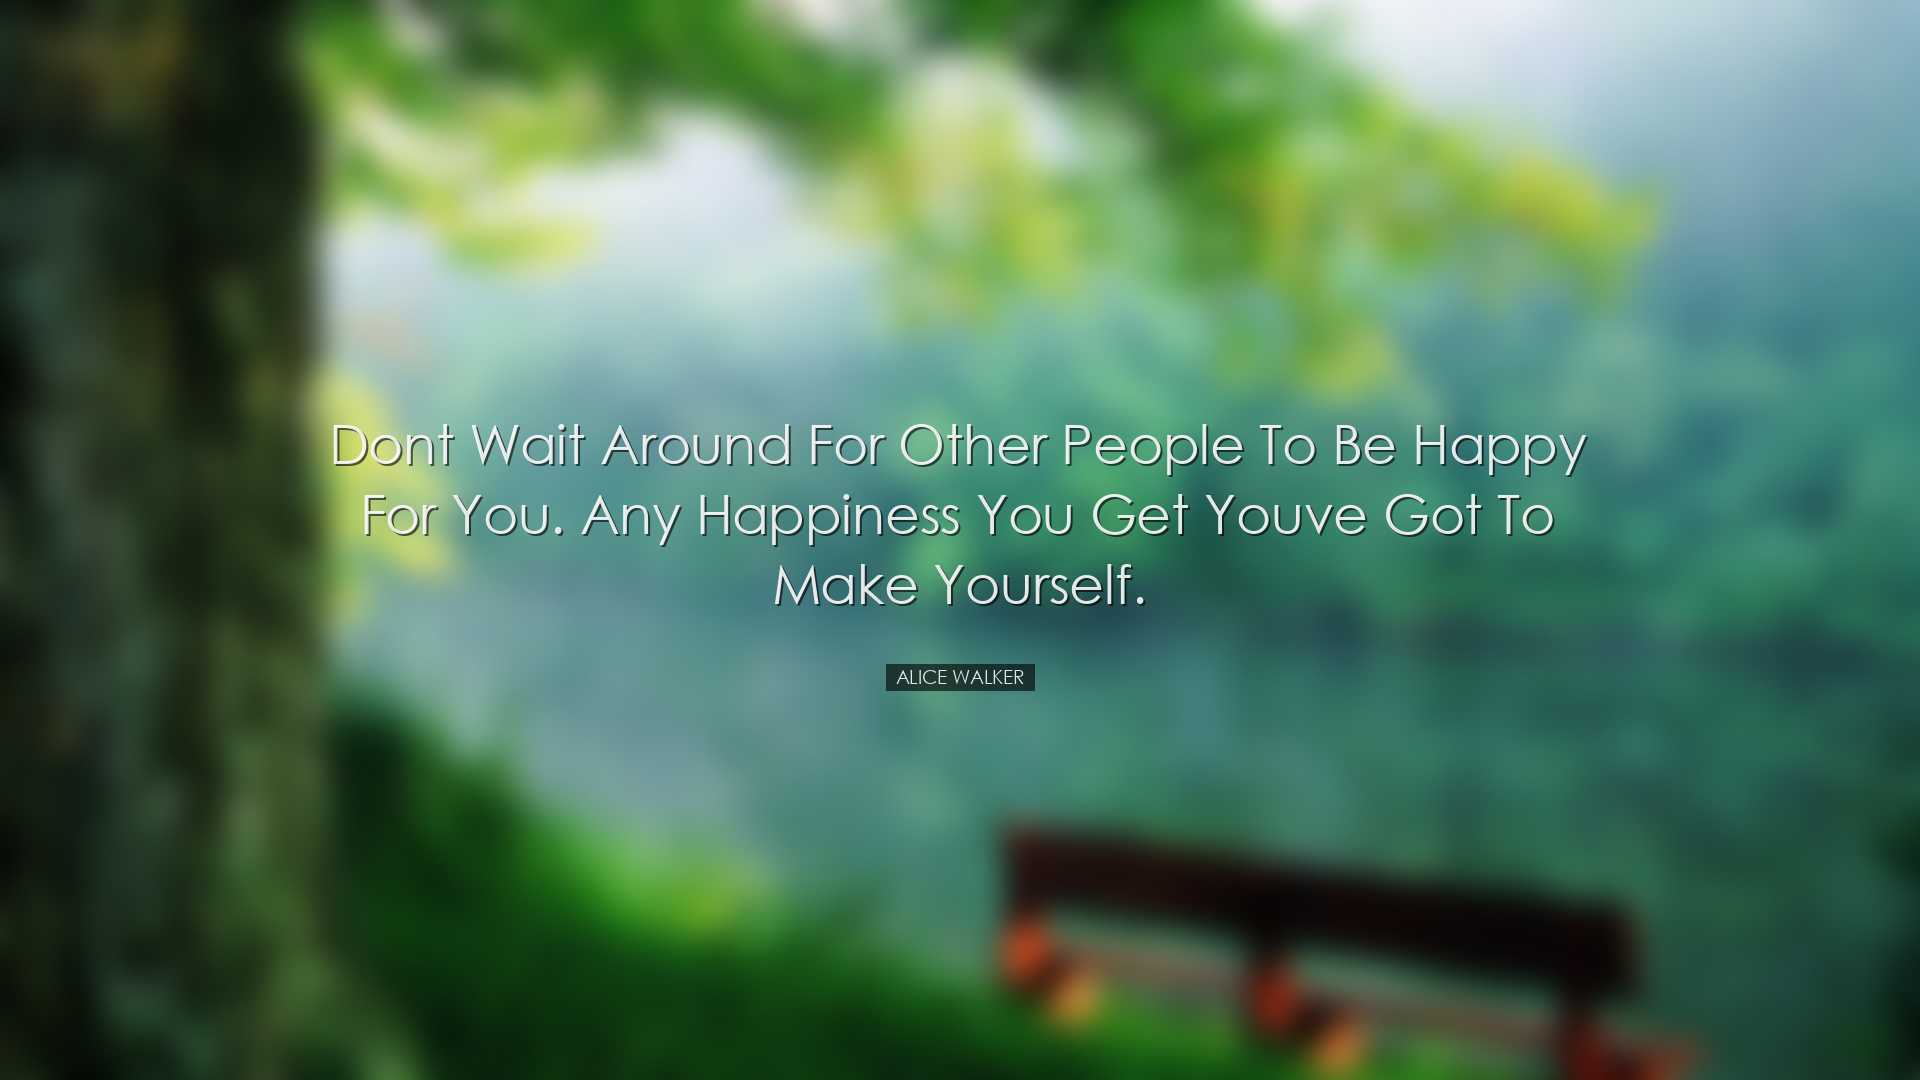 Dont wait around for other people to be happy for you. Any happine